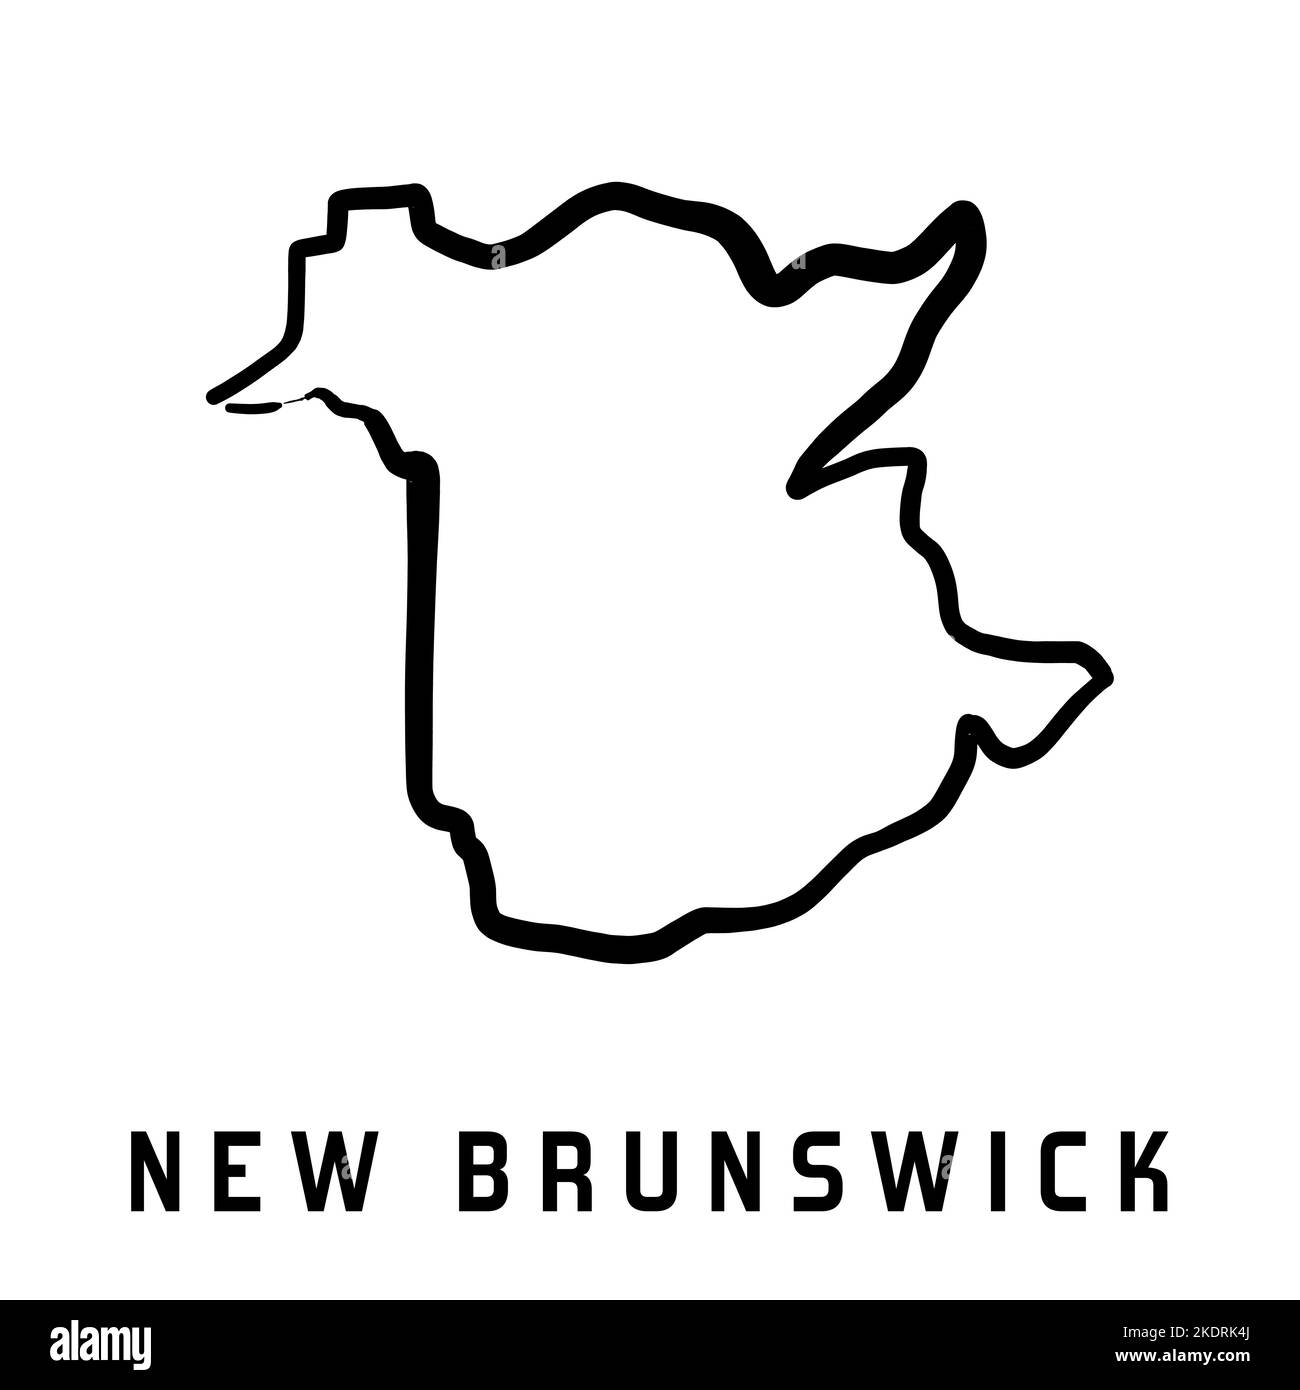 New Brunswick map outline - smooth simple hand-drawn Canadian province shape map vector. Province in Canada. Stock Vector